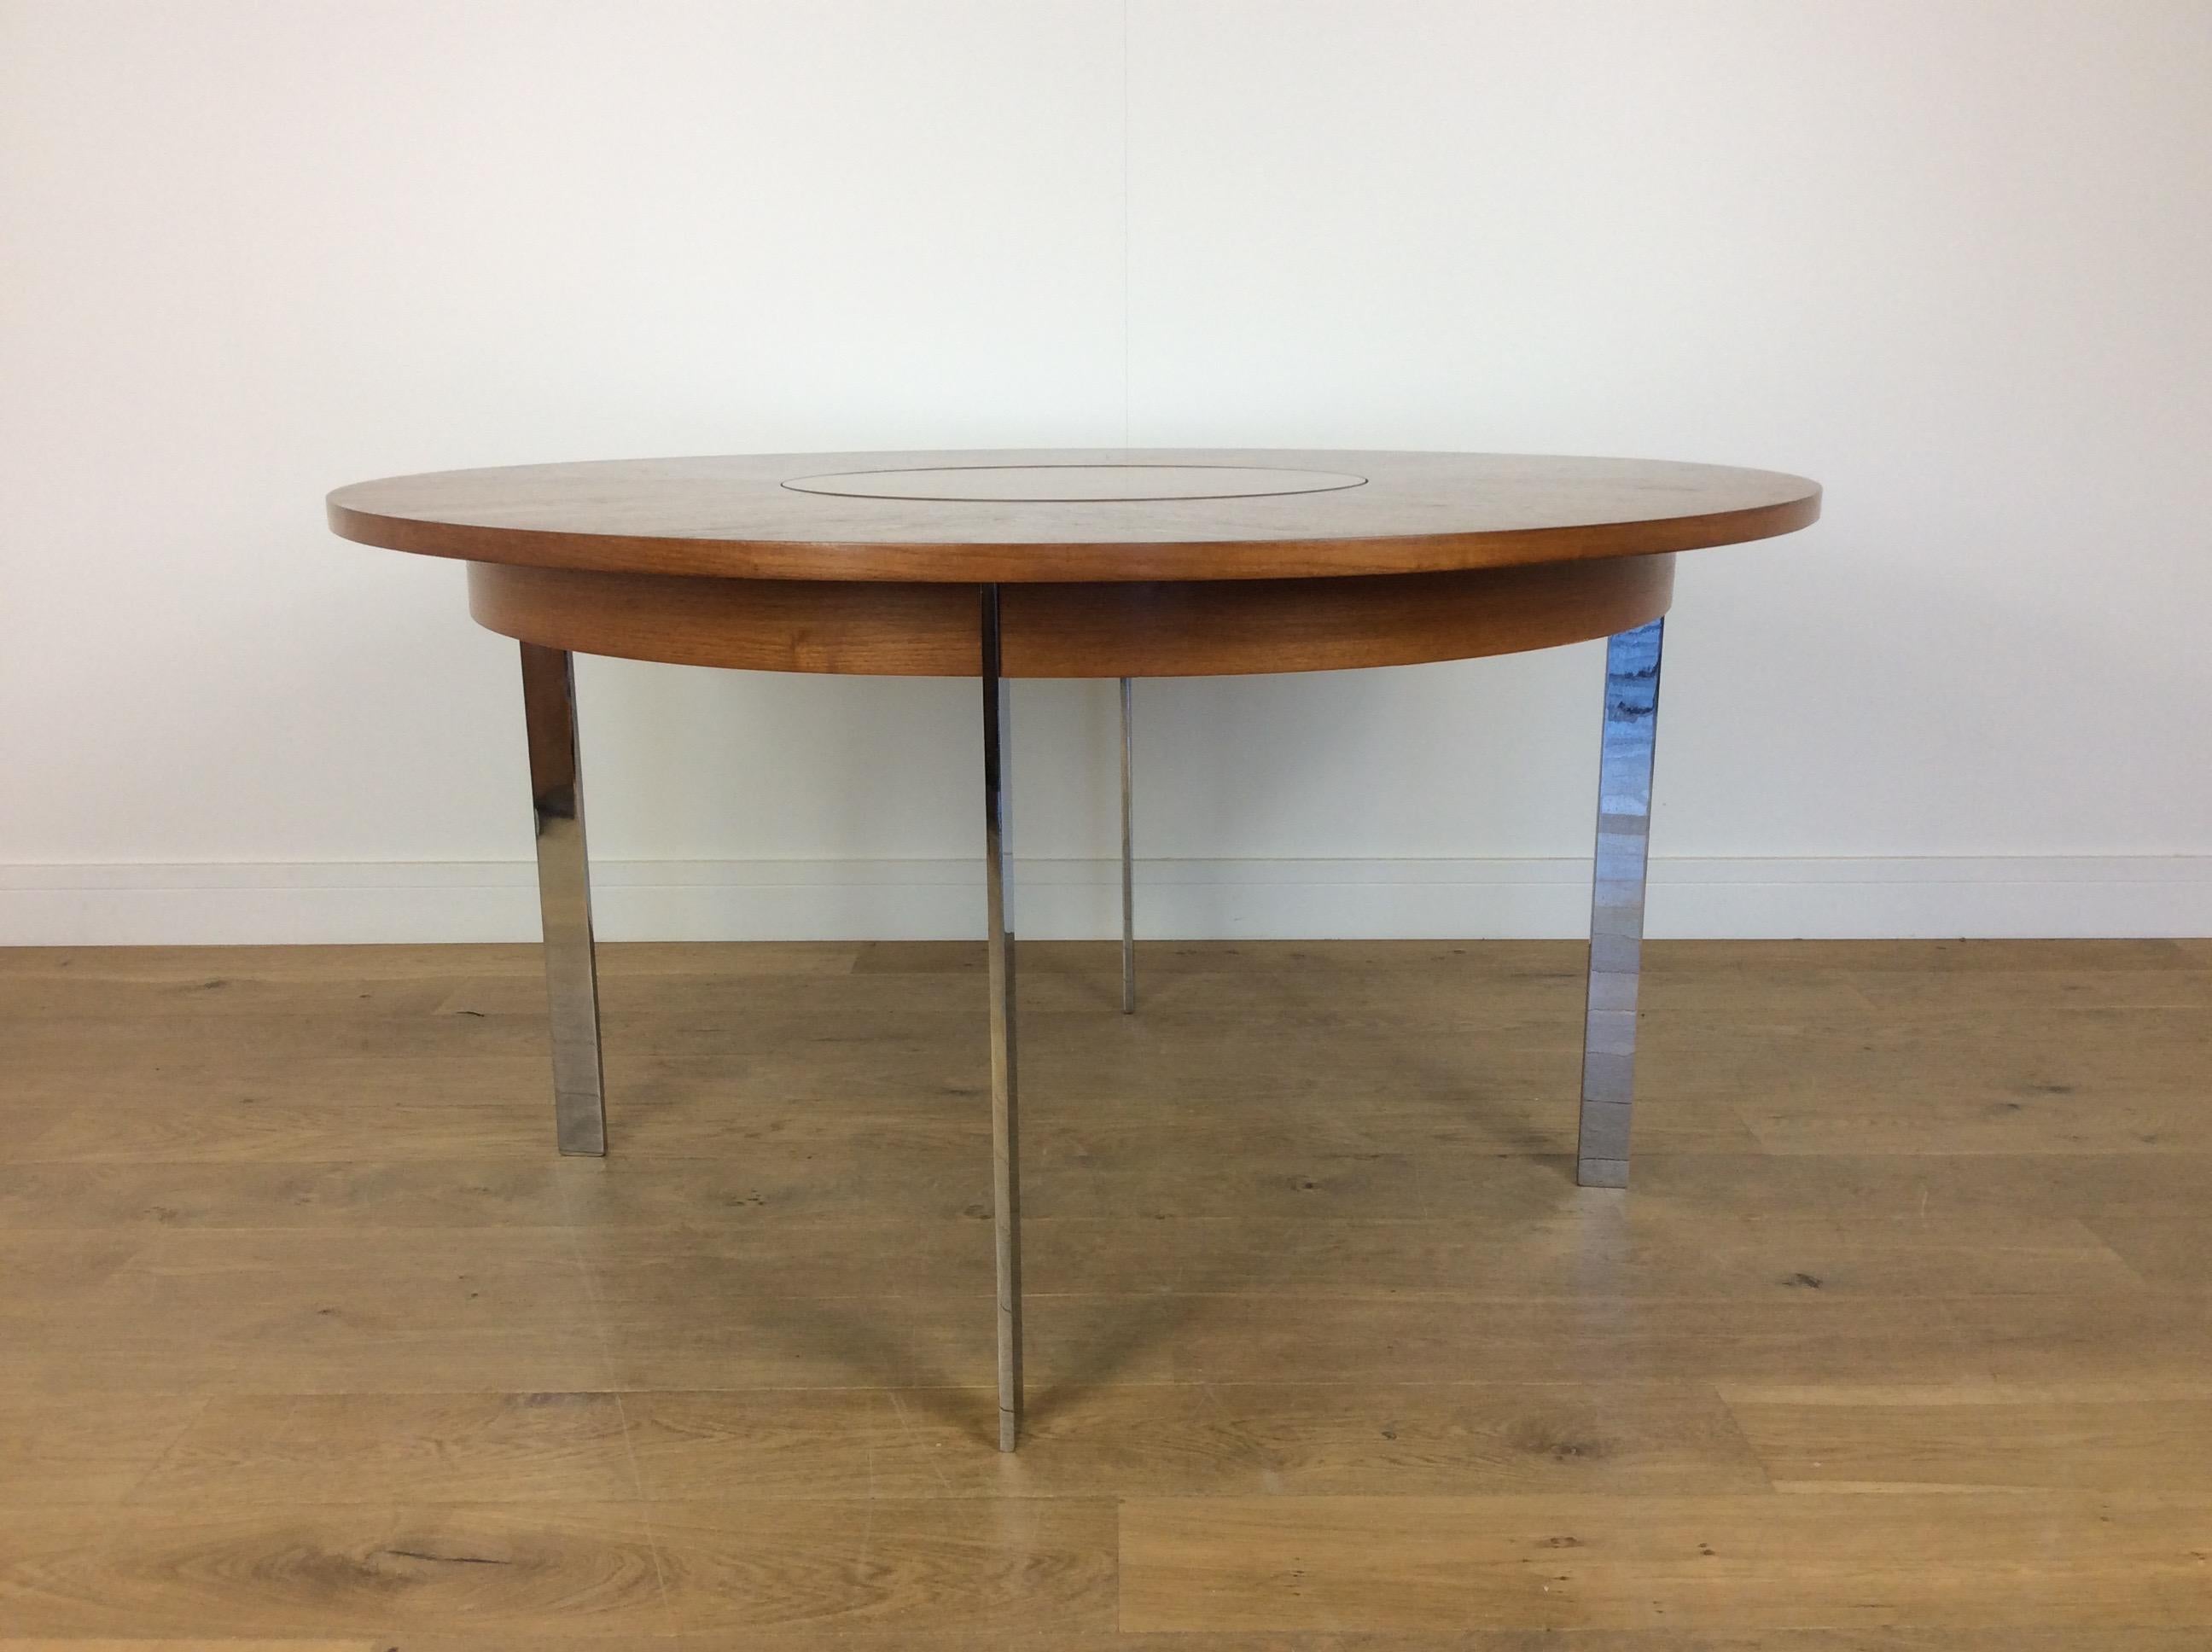 Midcentury rosewood table.
Midcentury dining table in a beautiful rosewood with flat chrome supports, incorporating a central turntable, know as a lazy Susan.
Measures: 73 cm height 137 cm diameter, the lazy Susan is 56 cm diameter
Designed by